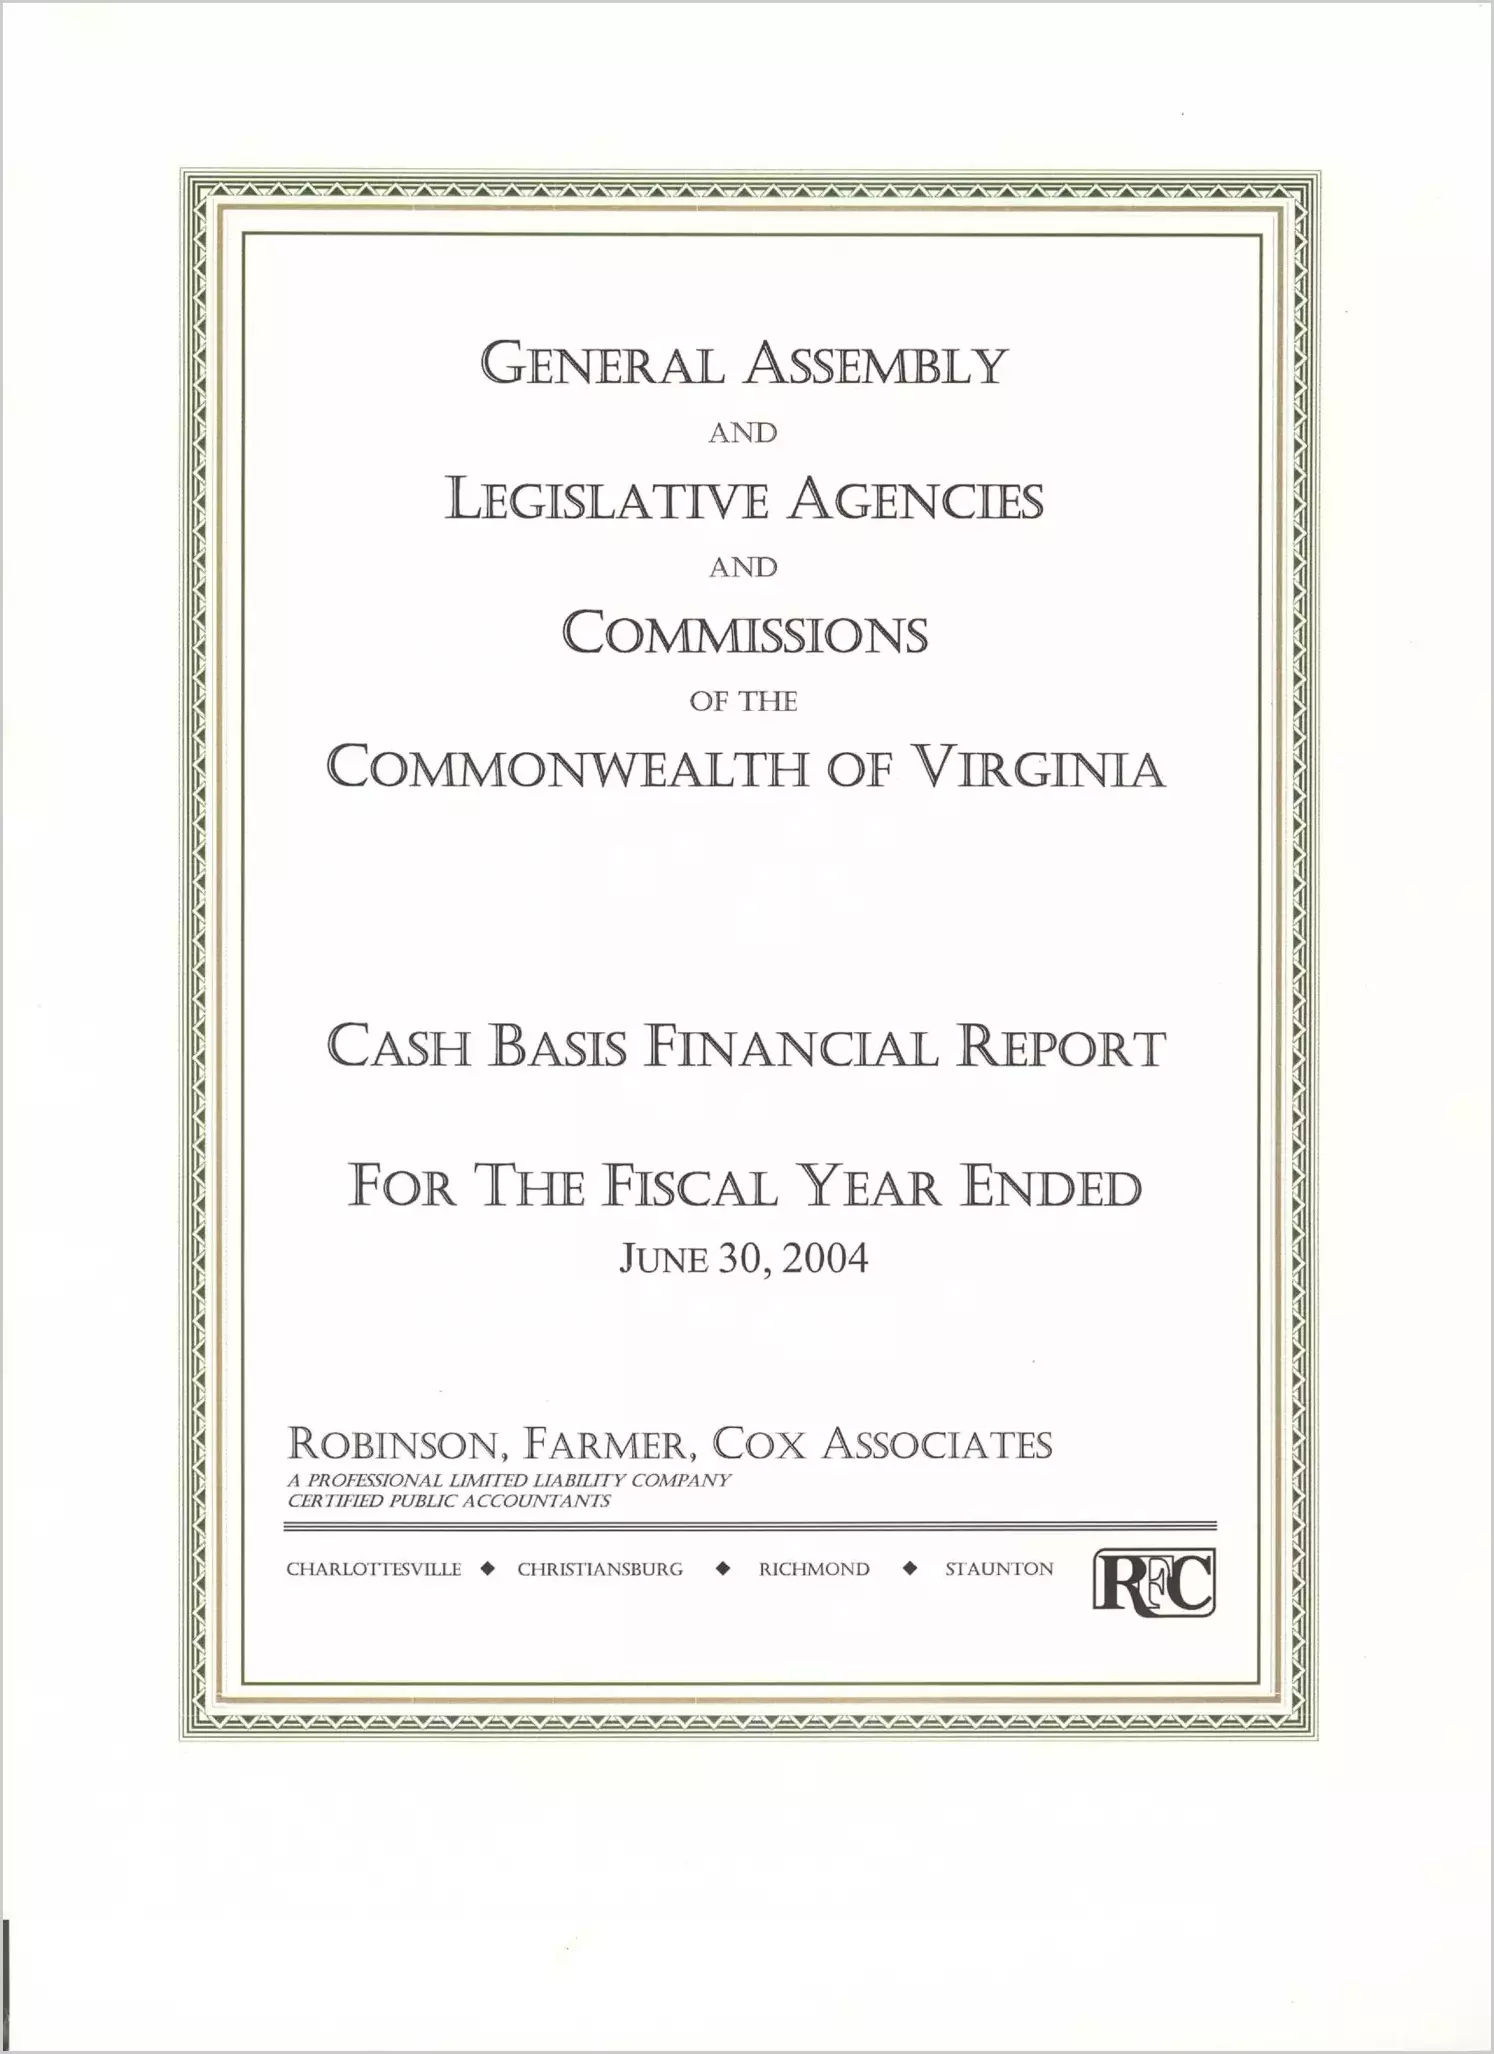 General Assembly and Legislative Agencies and Commissions of the Commonwealth of Virginia Cash Basis Financial Report For The Fiscal Year ended June 30, 2004